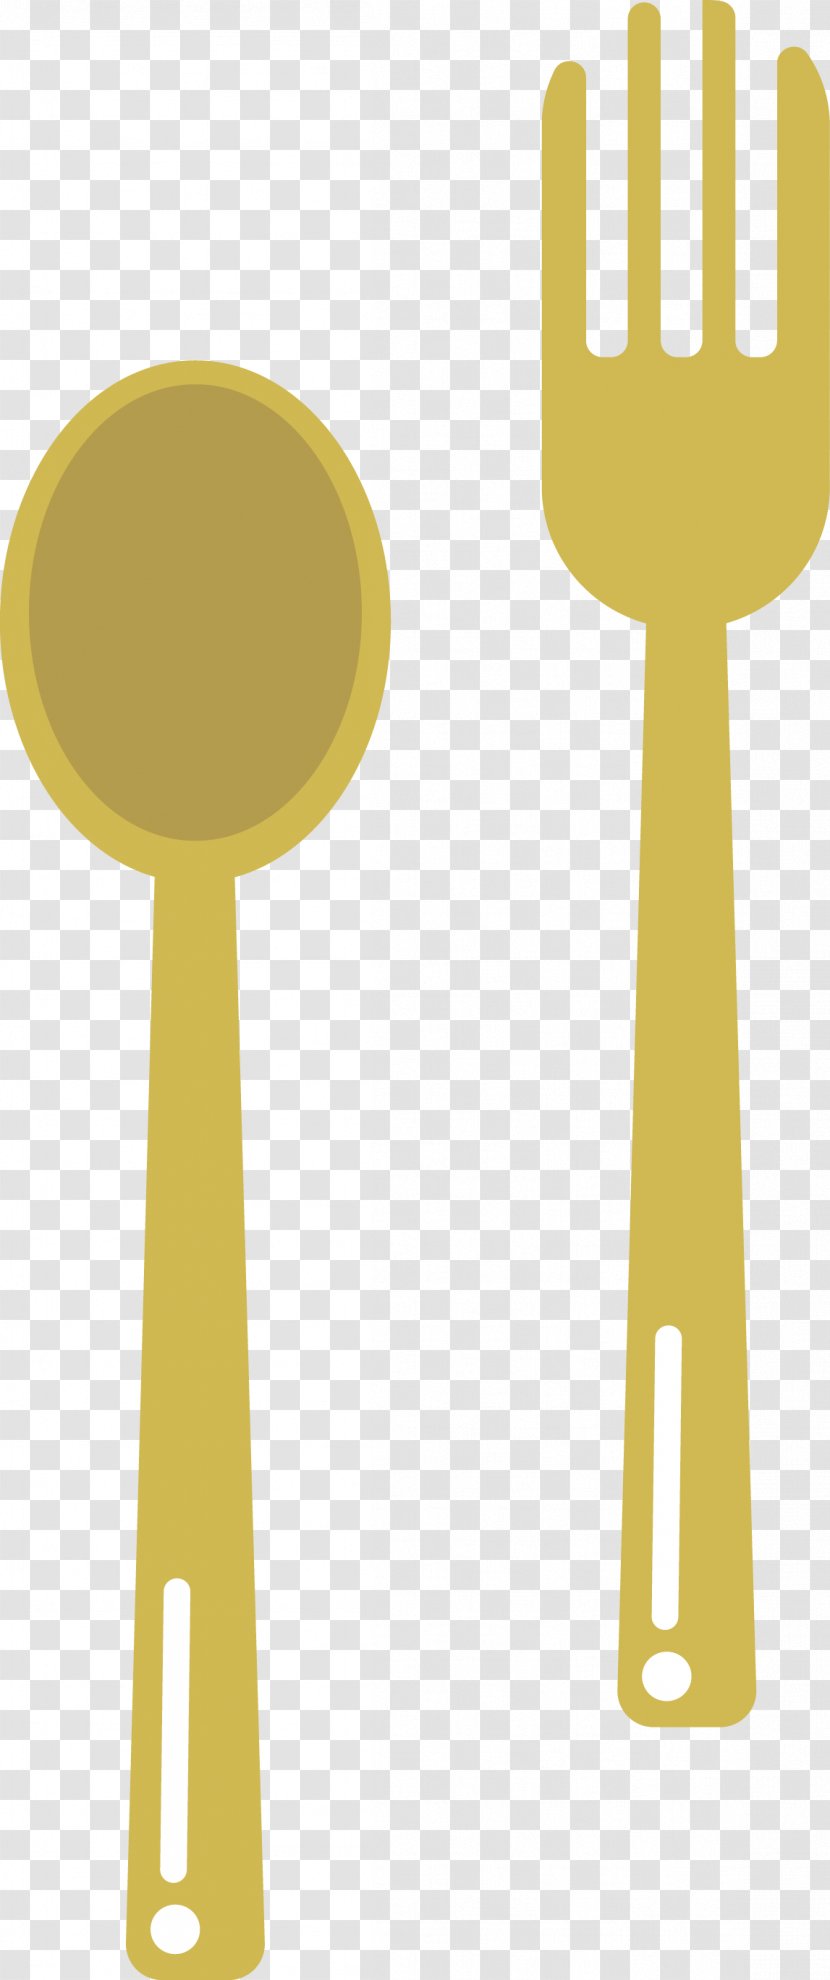 Fork Spoon Knife - And Vector Plane Transparent PNG